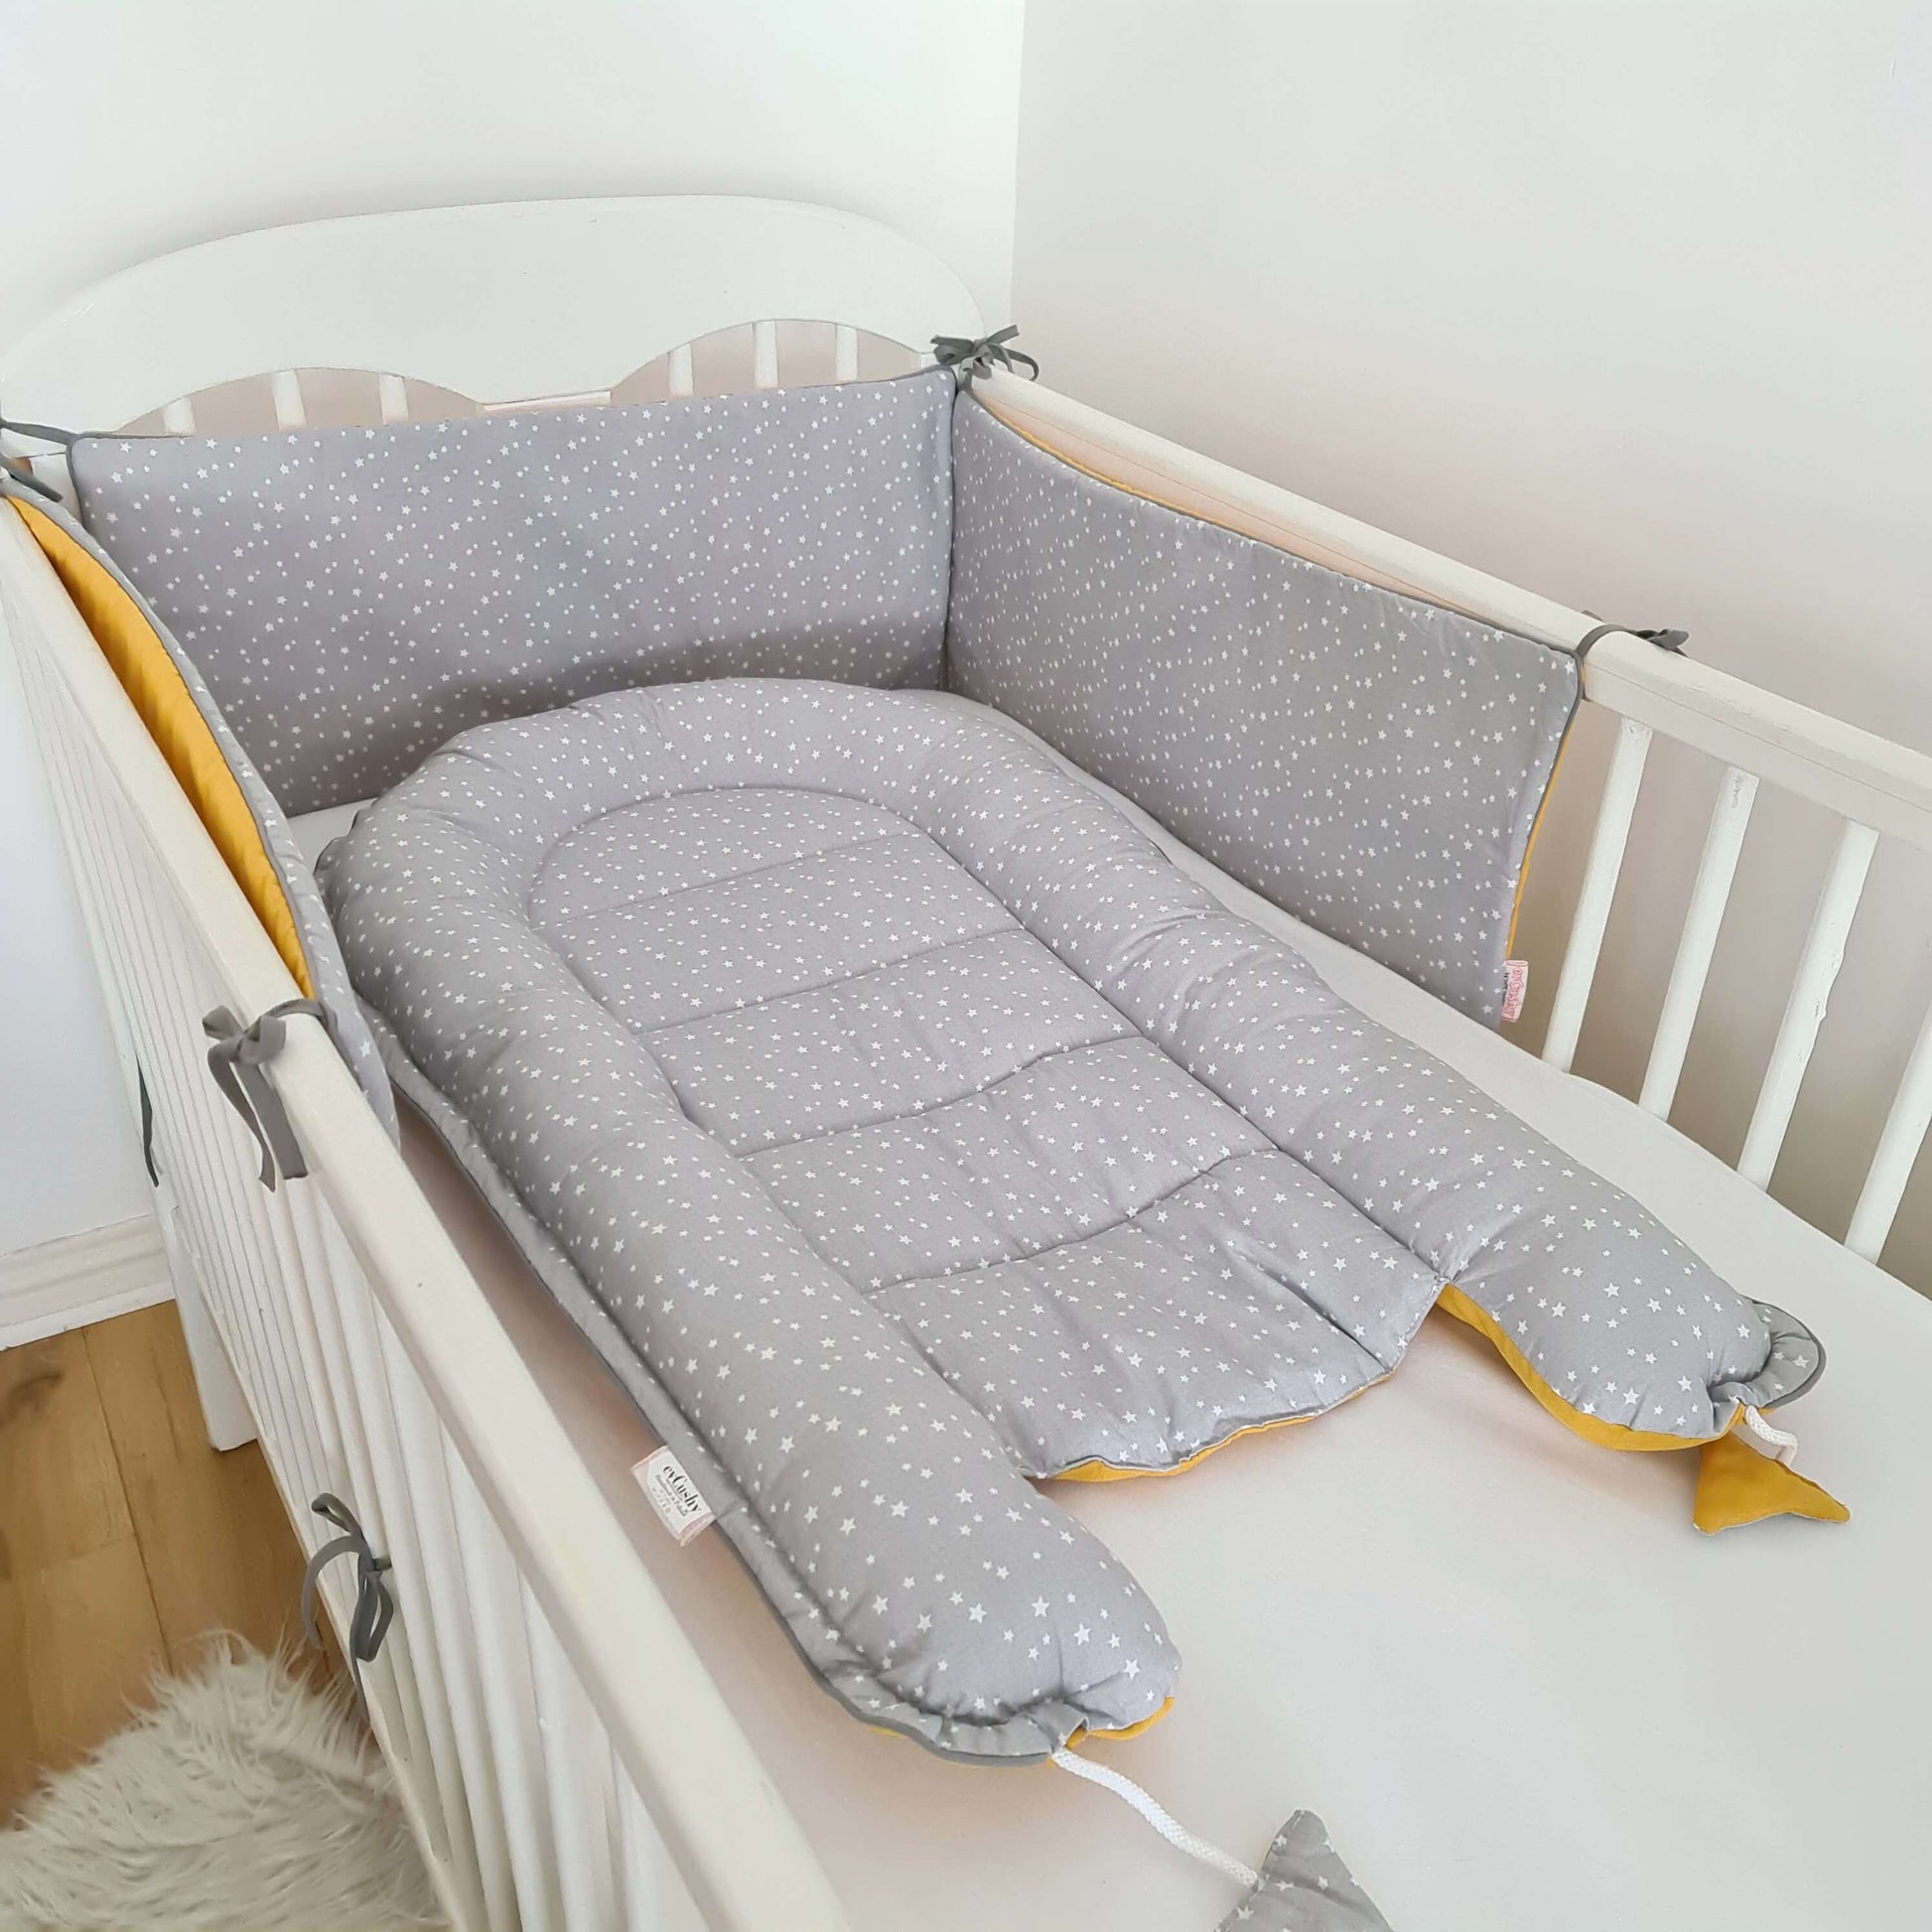 comfortable safe play mat lounger pod to relax for baby